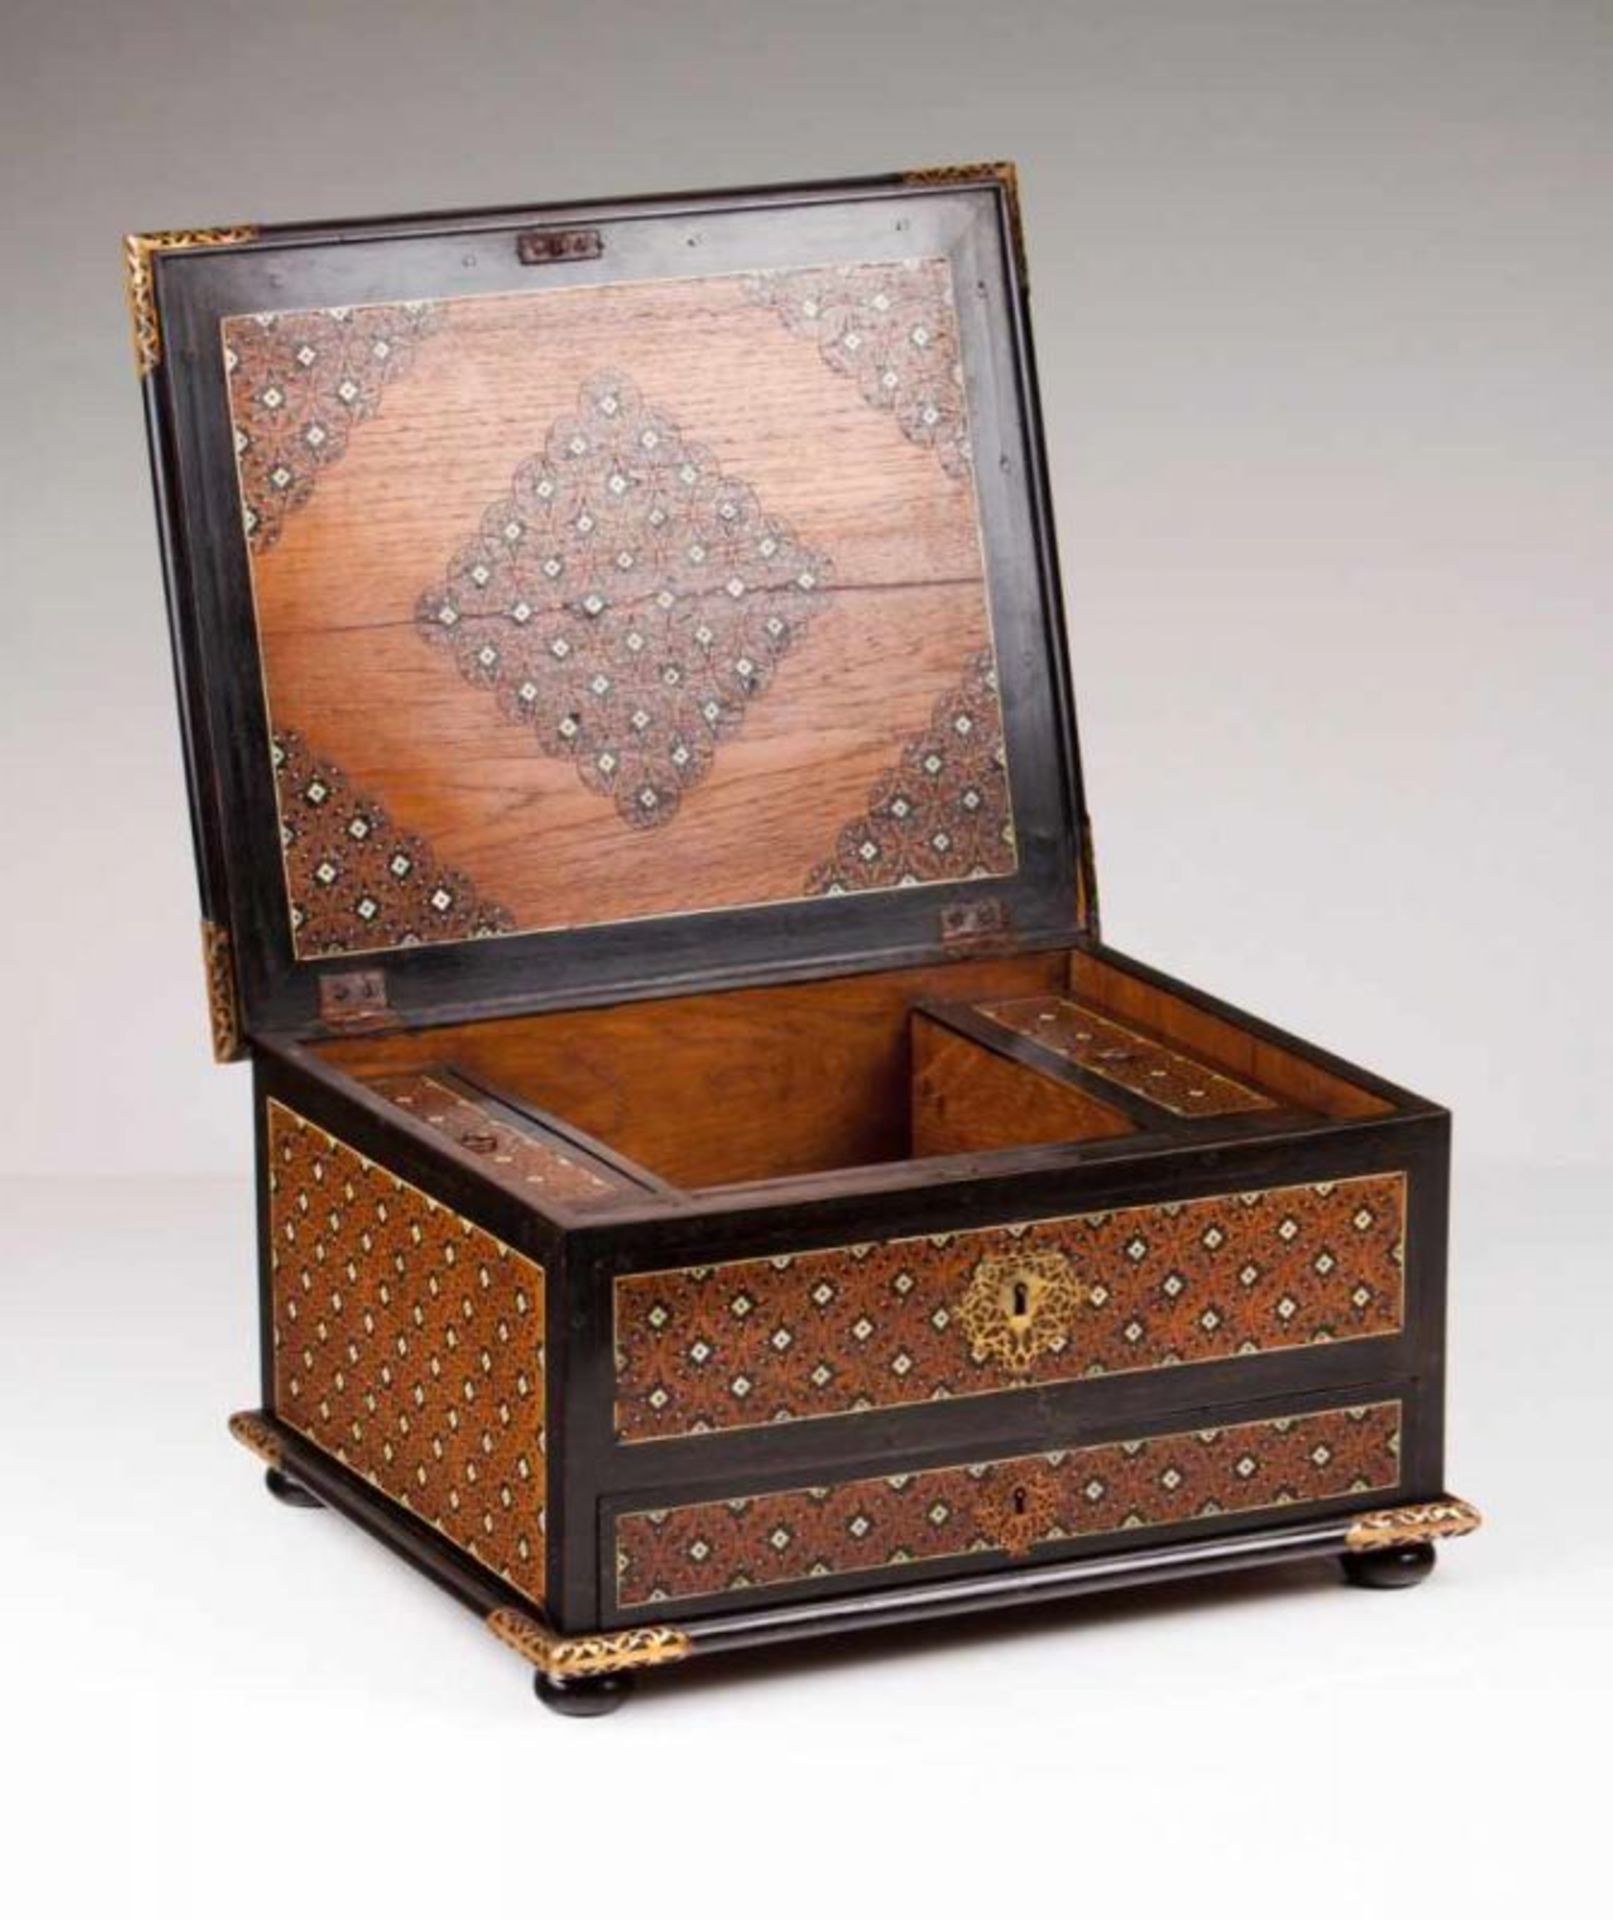 An Indo-Portuguese traveling cabinet Teak with Sissoo and ivory inlaid decoration Geometric pattern - Image 2 of 2